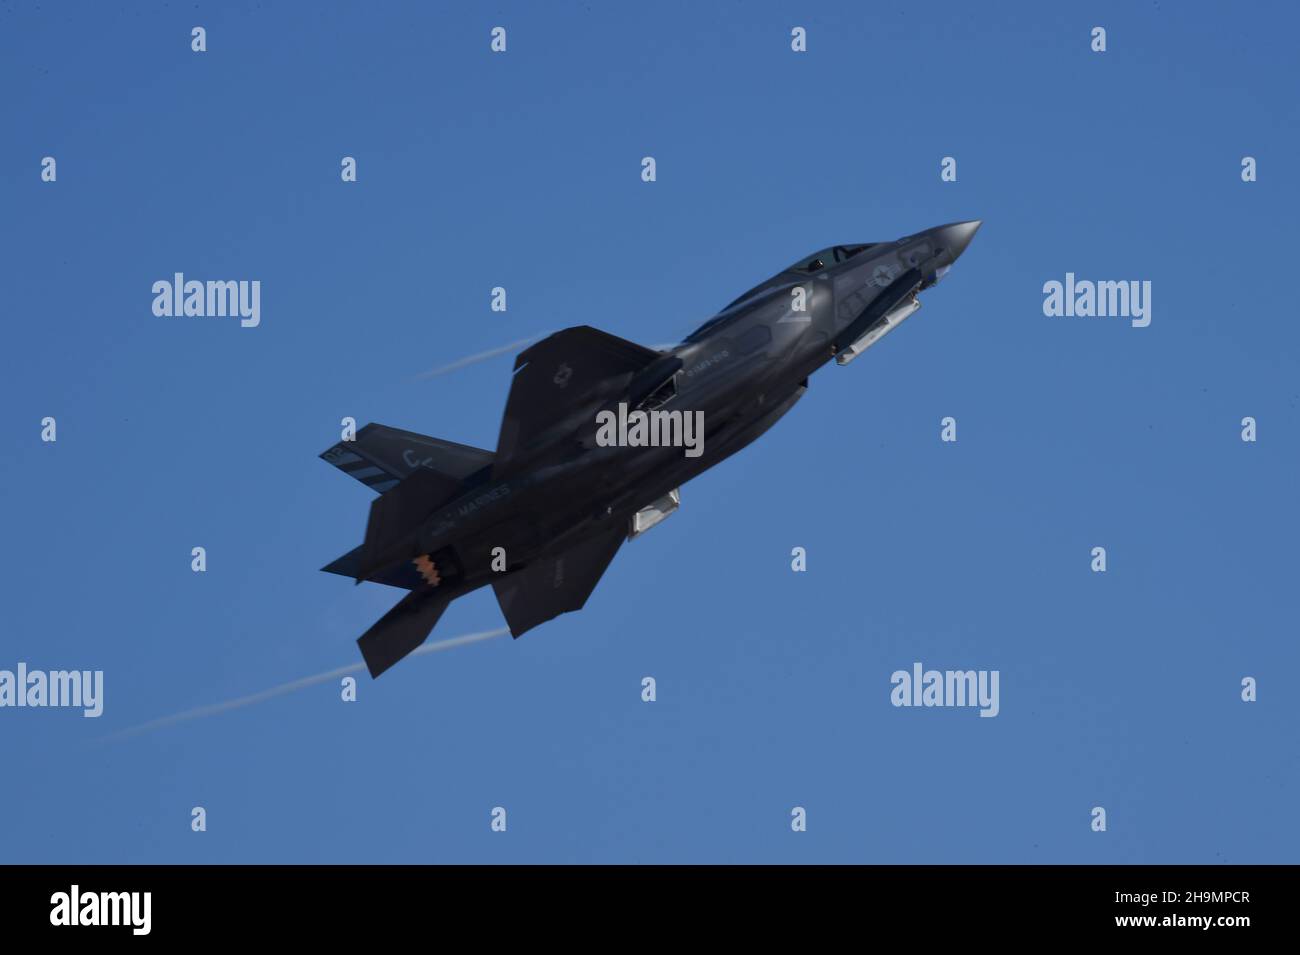 United States Marine Corps F-35B Lightning II performs a flyby  during a demonstration aboard MCAS Miramar, in San Diego, California. Stock Photo